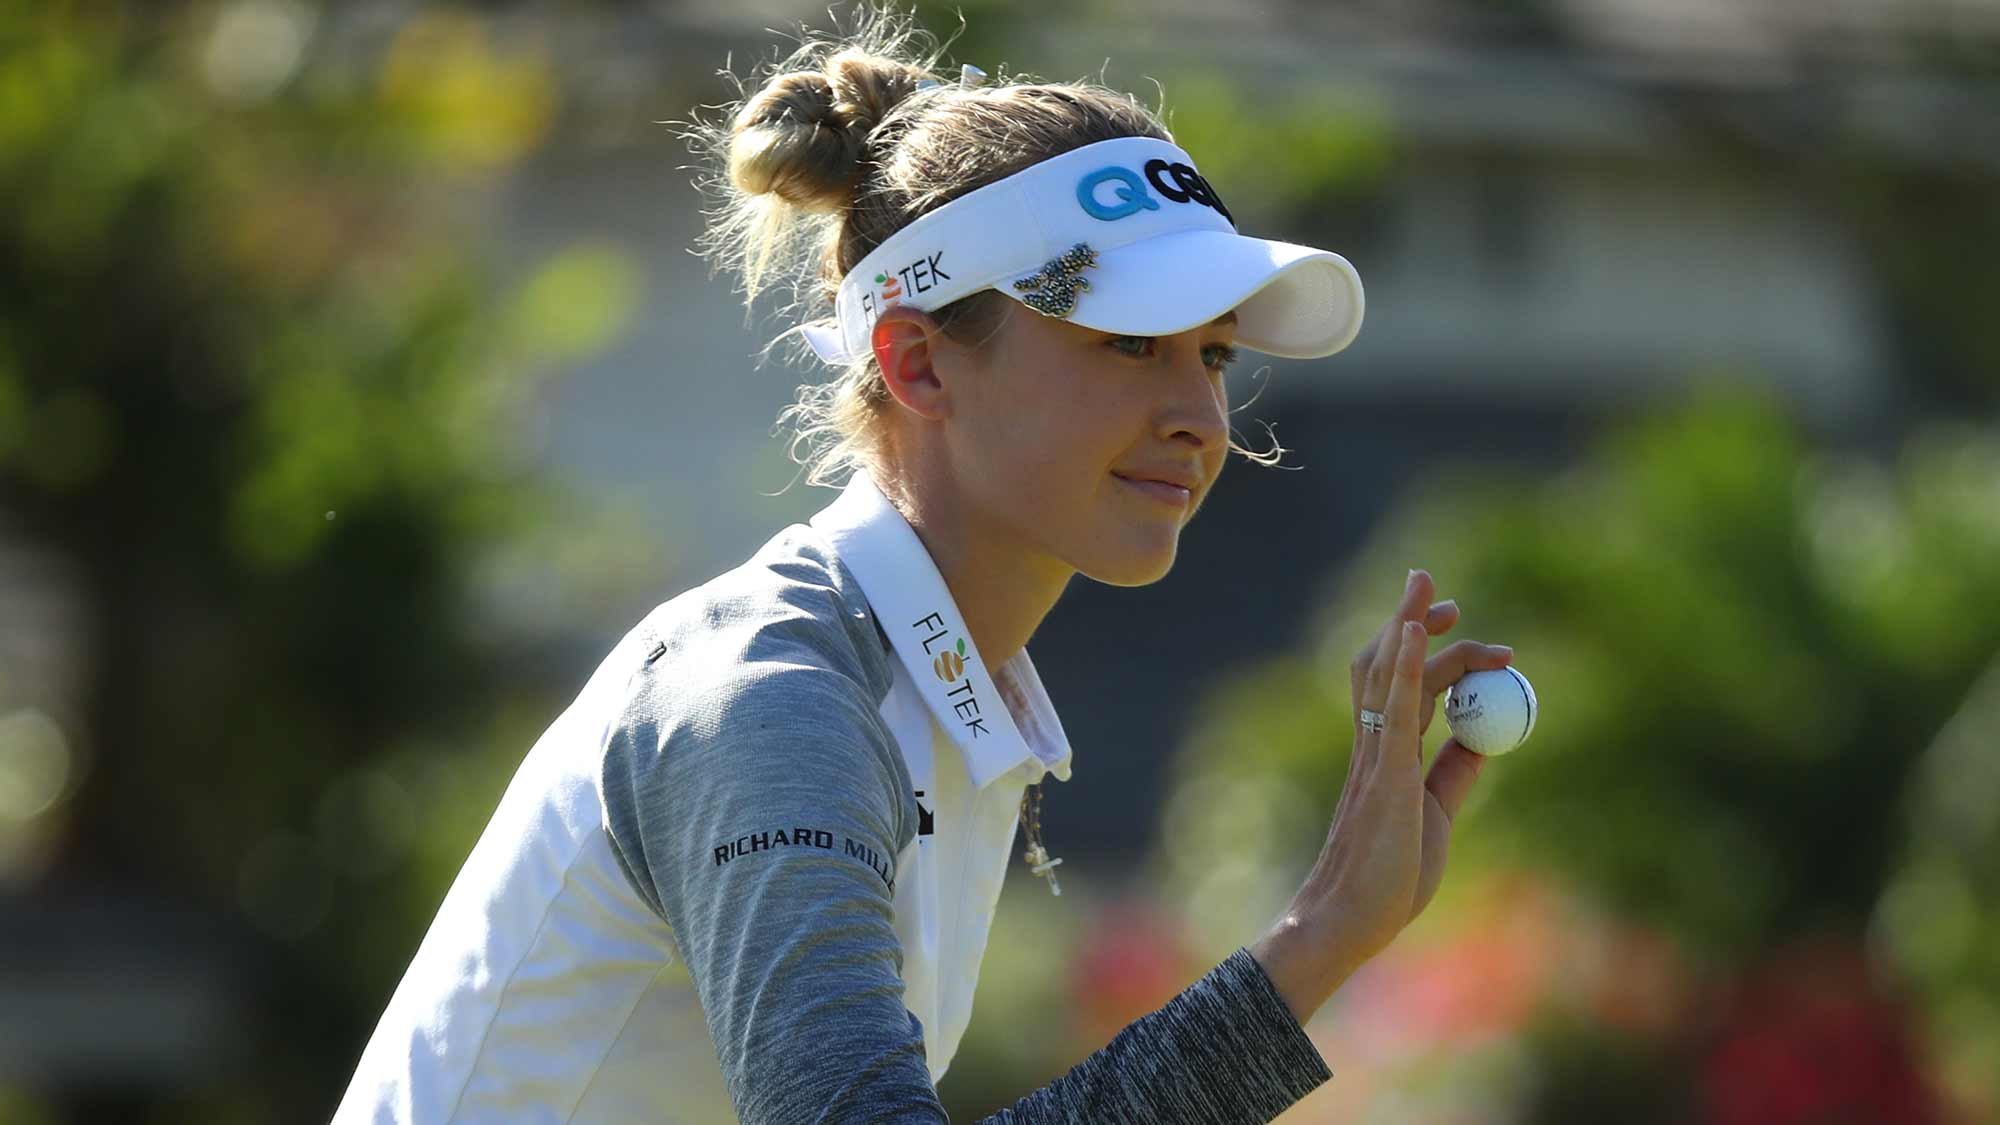 Nelly Korda waves to fans after a birdie on the 15th green during the first round of the Lotte Championship on April 18, 2019 in Kapolei, Hawaii